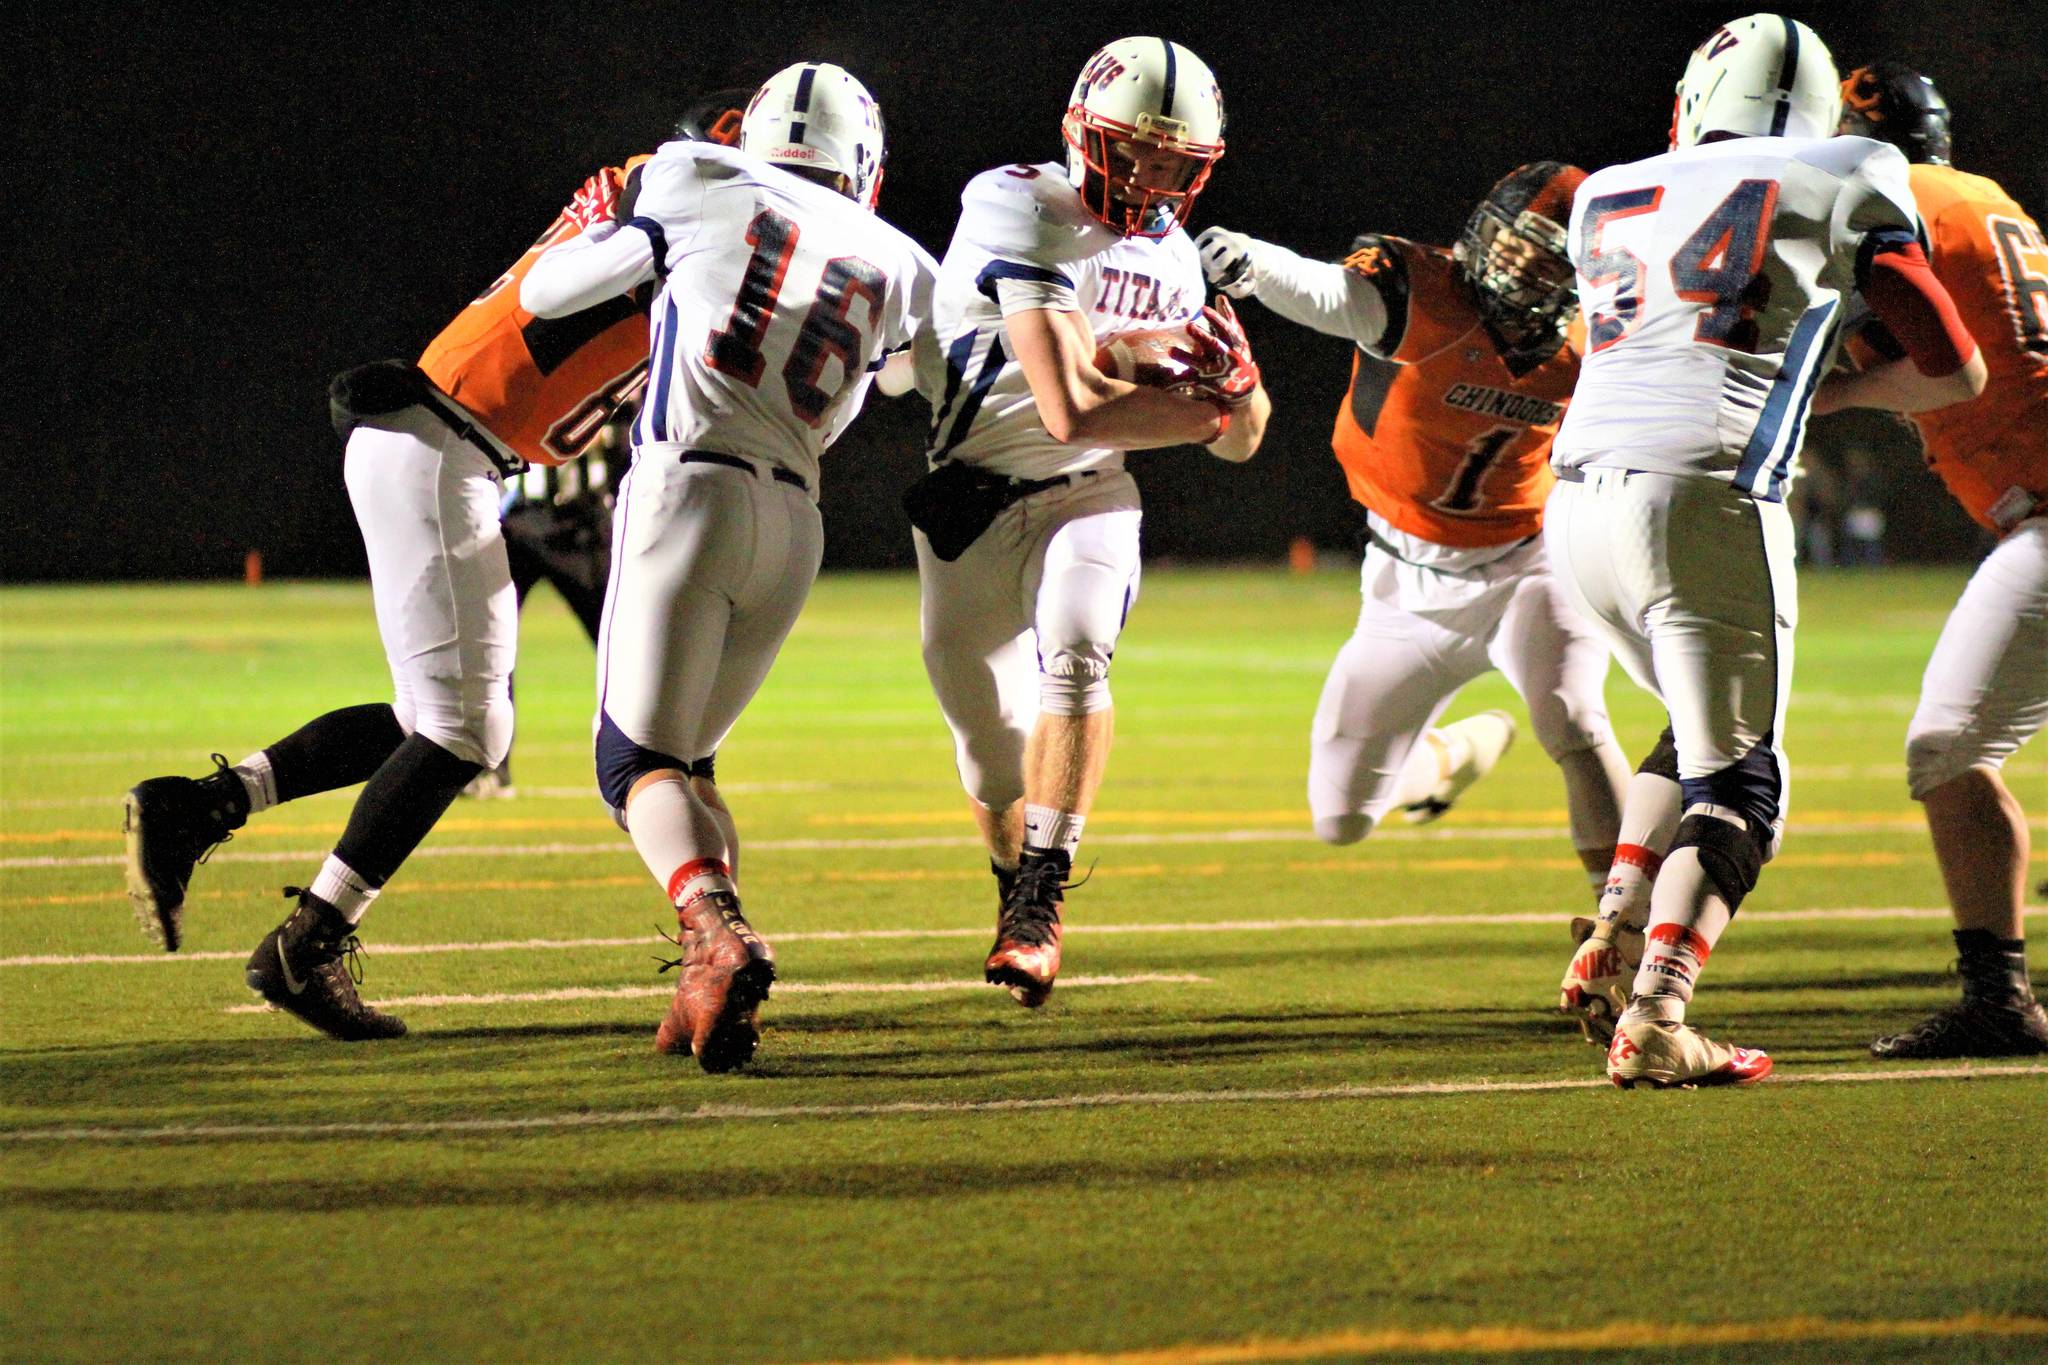 (Photo by Larry Bale) Peter Hamilton squirts through a hole on the way the end zone. He gained 96 yards on 21 carries.